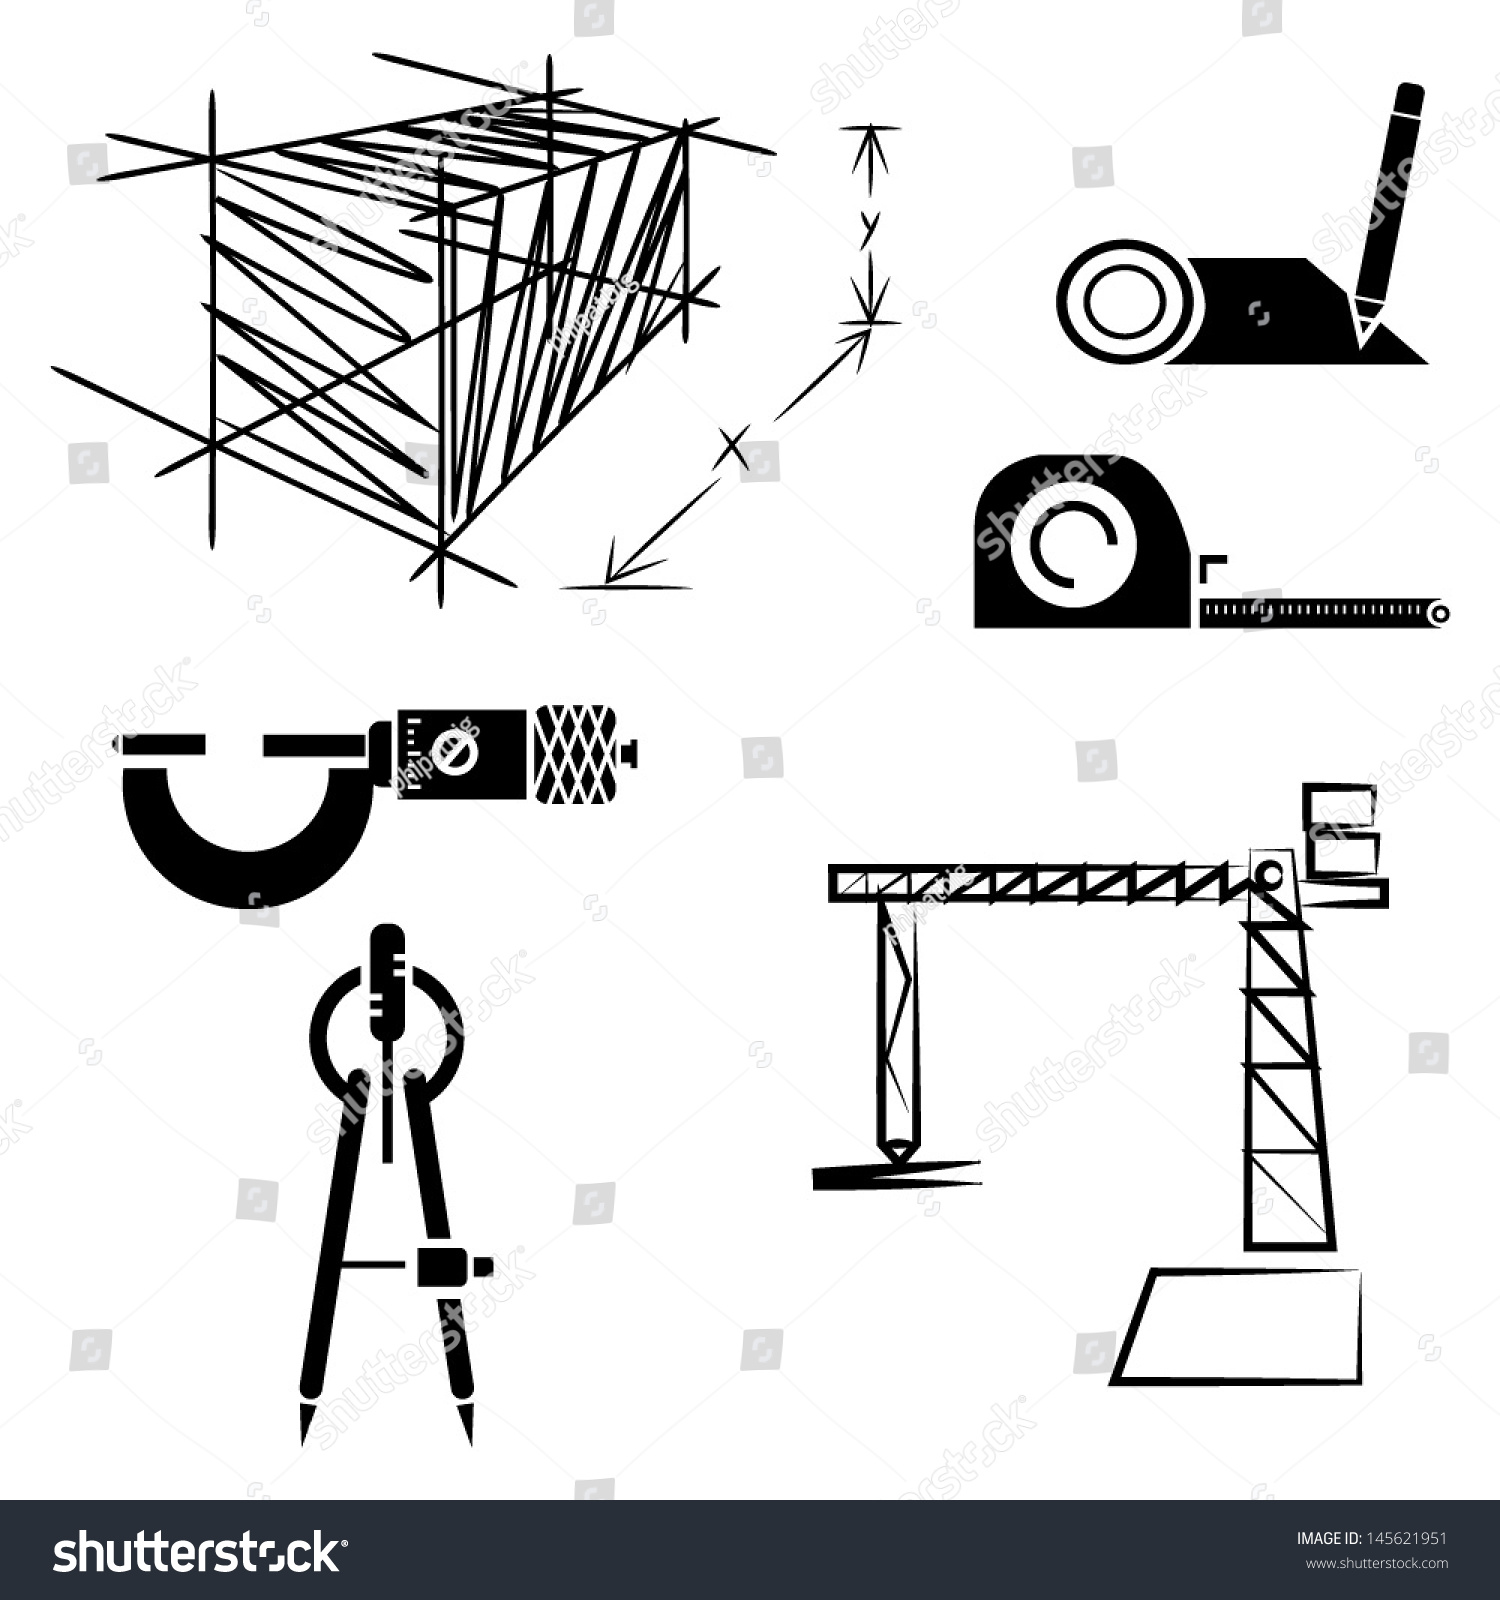 Drawing Icons, Engineering Tools, Construction Stock Vector